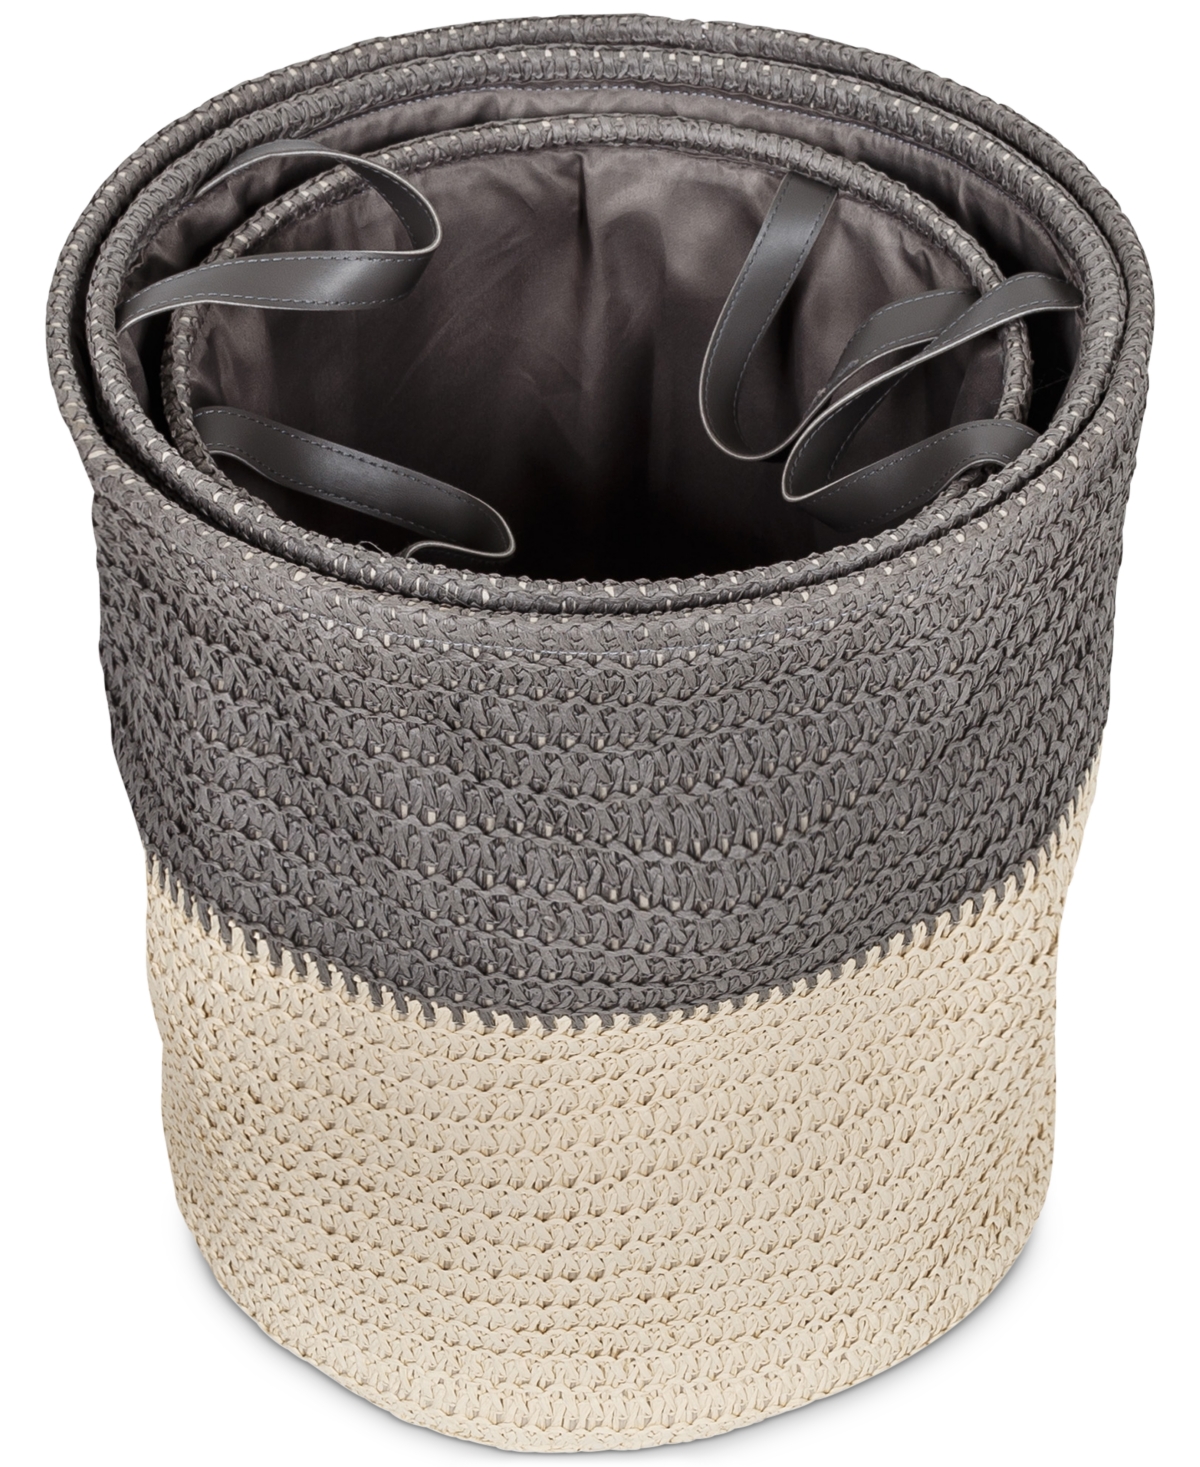 Shop Honey Can Do Flexible Laundry Baskets With Handles, Set Of 3 In Natural